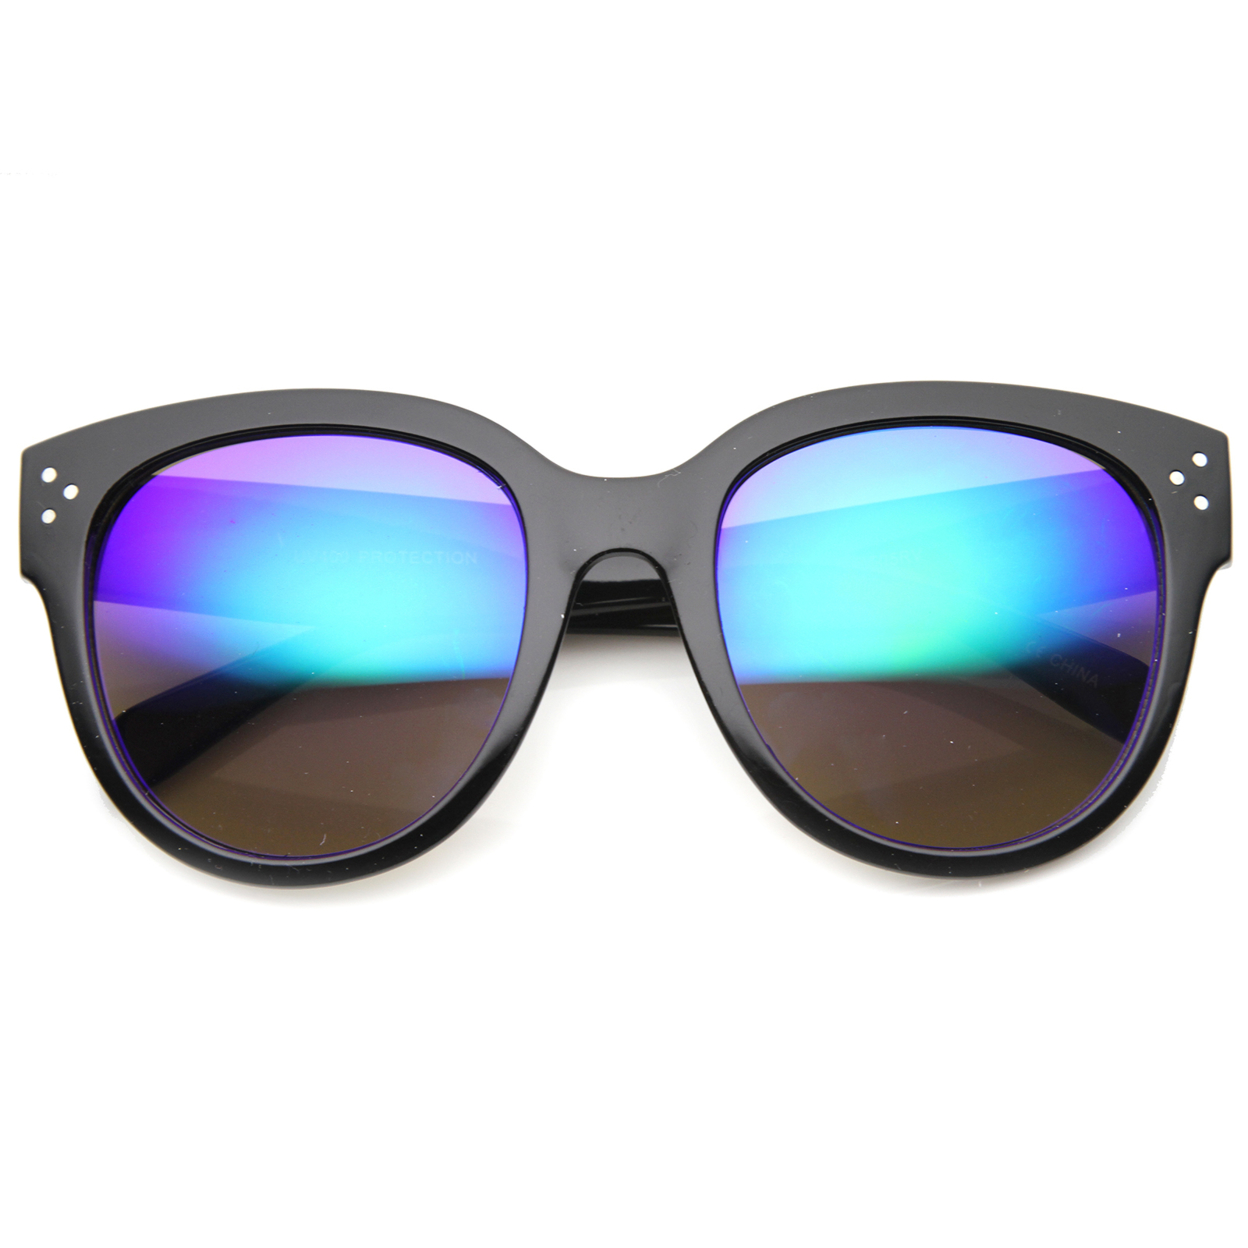 Unisex Oversized Sunglasses With UV400 Protected Composite Lens 9849 - Black / Fire